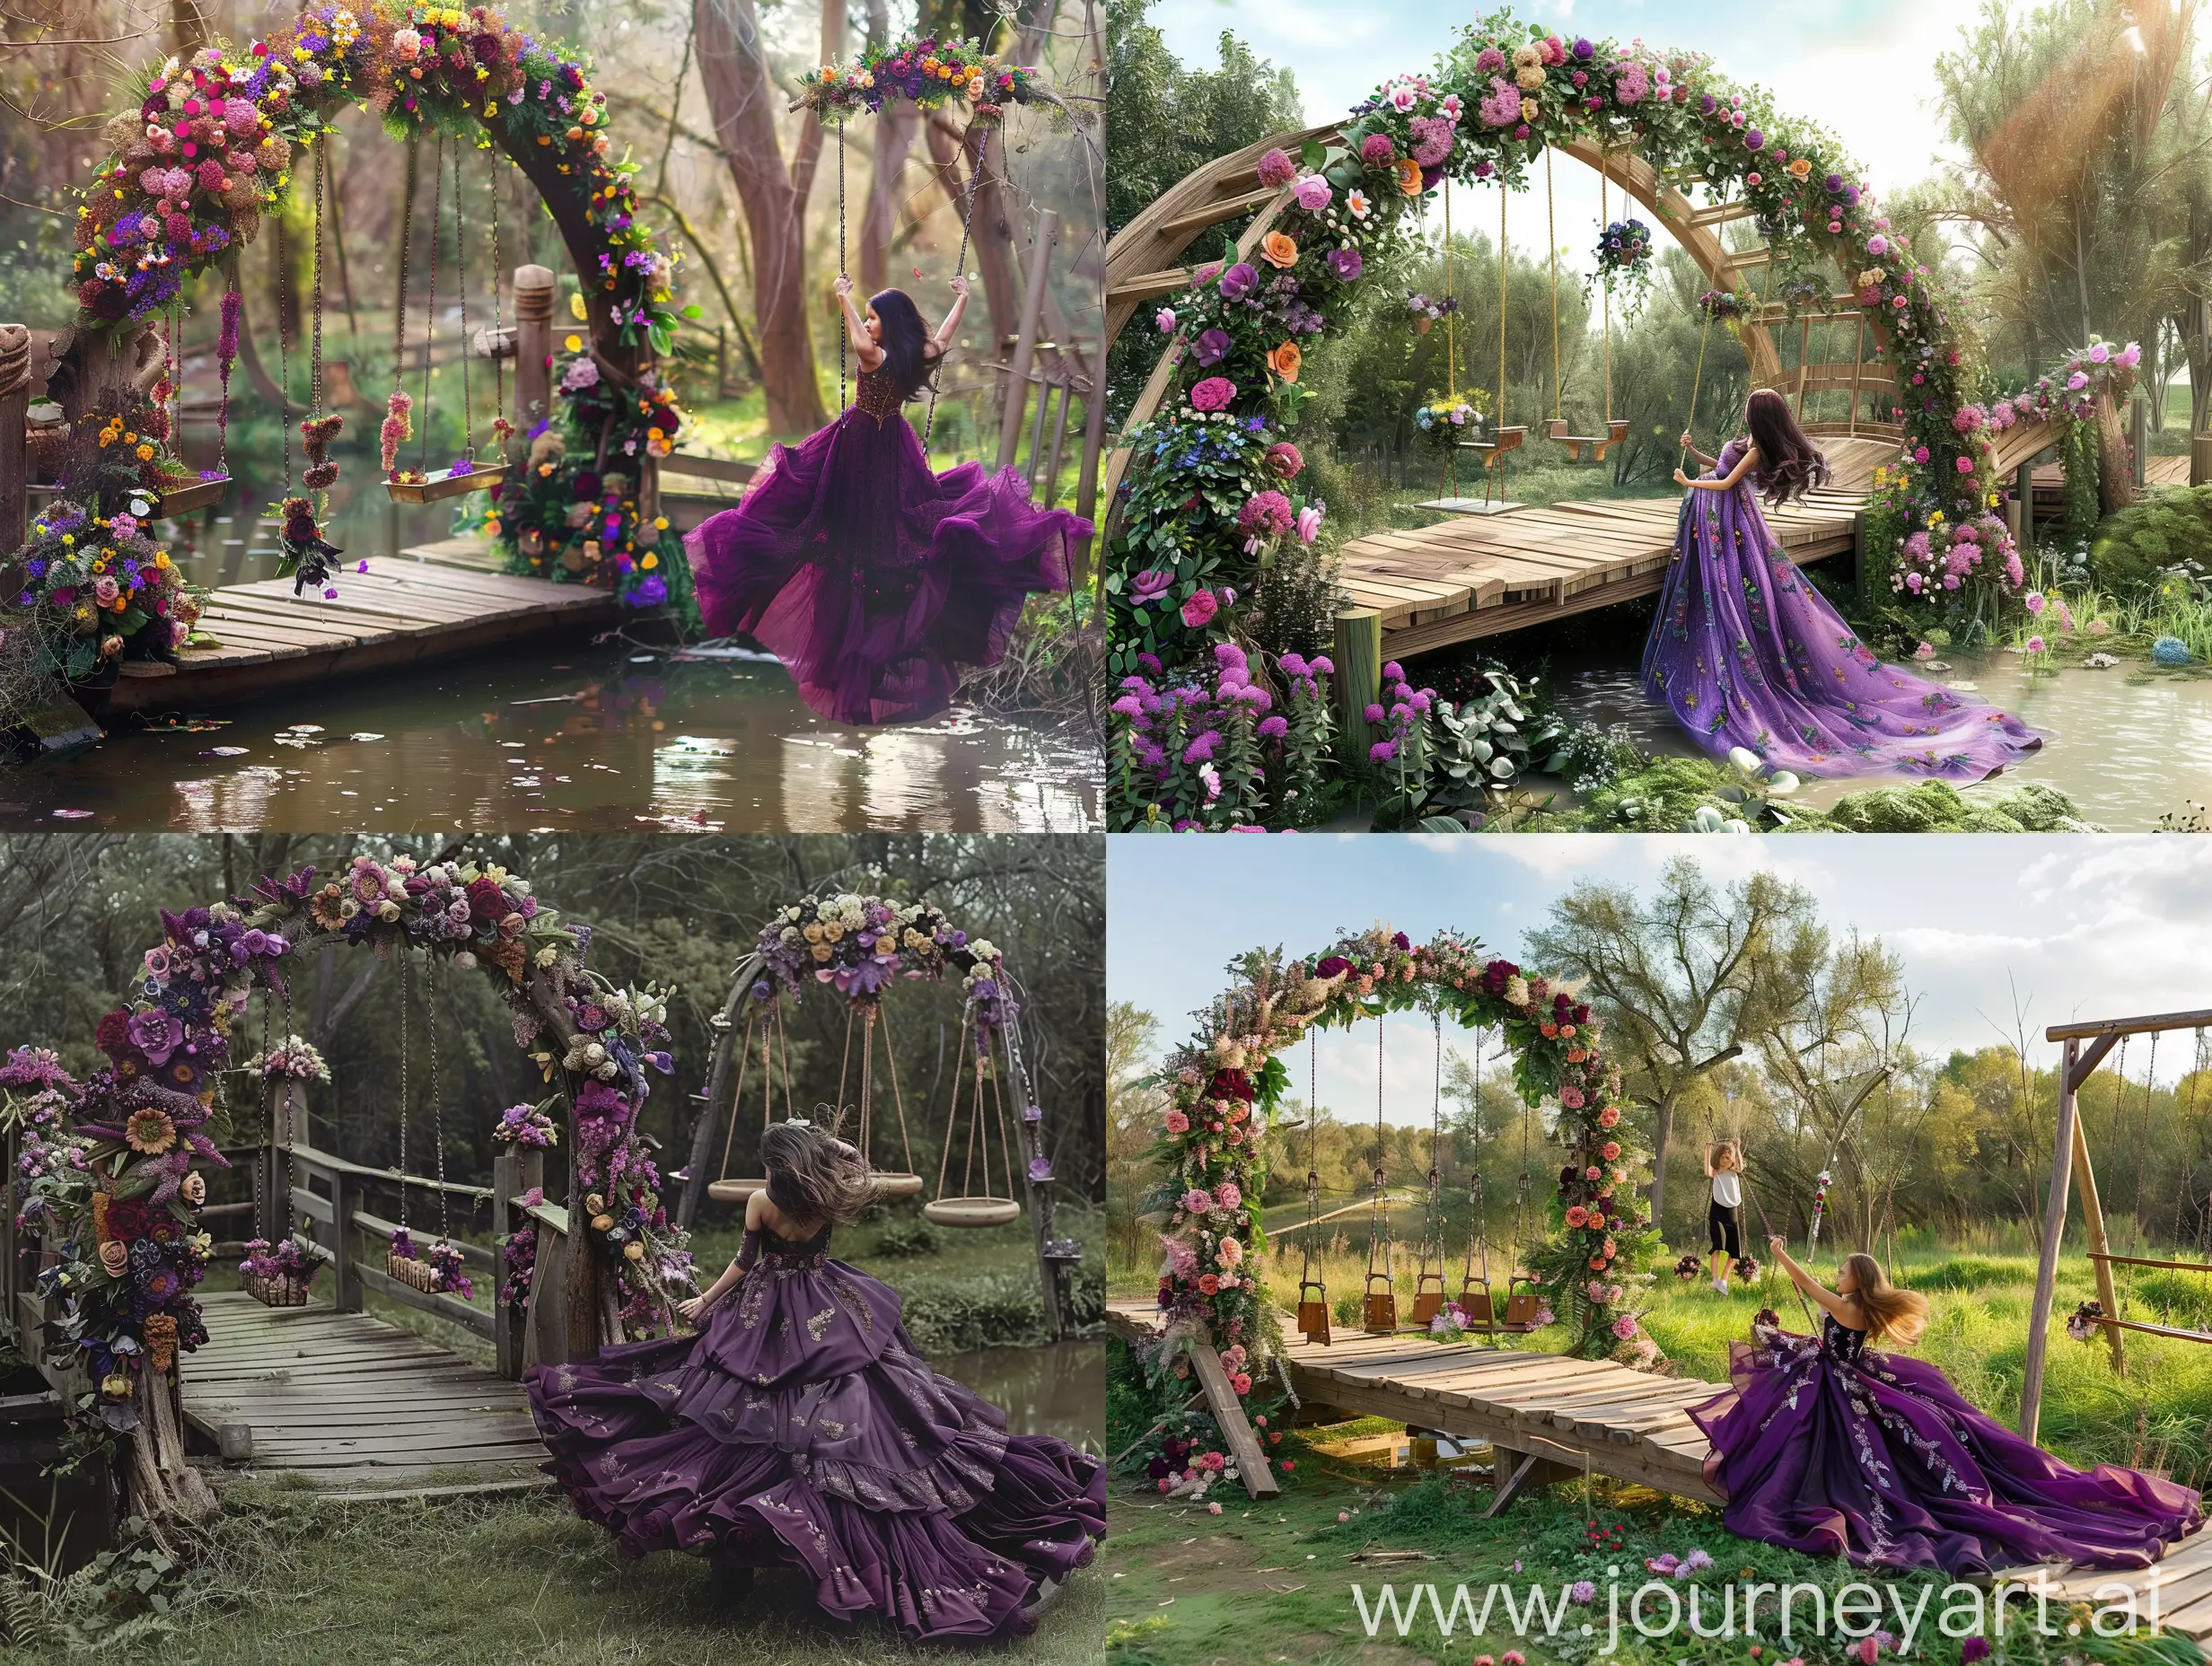 Enchanted-Wooden-Bridge-with-Floral-Arch-and-Swings-Serene-Scene-with-a-Girl-in-a-Violet-Dress